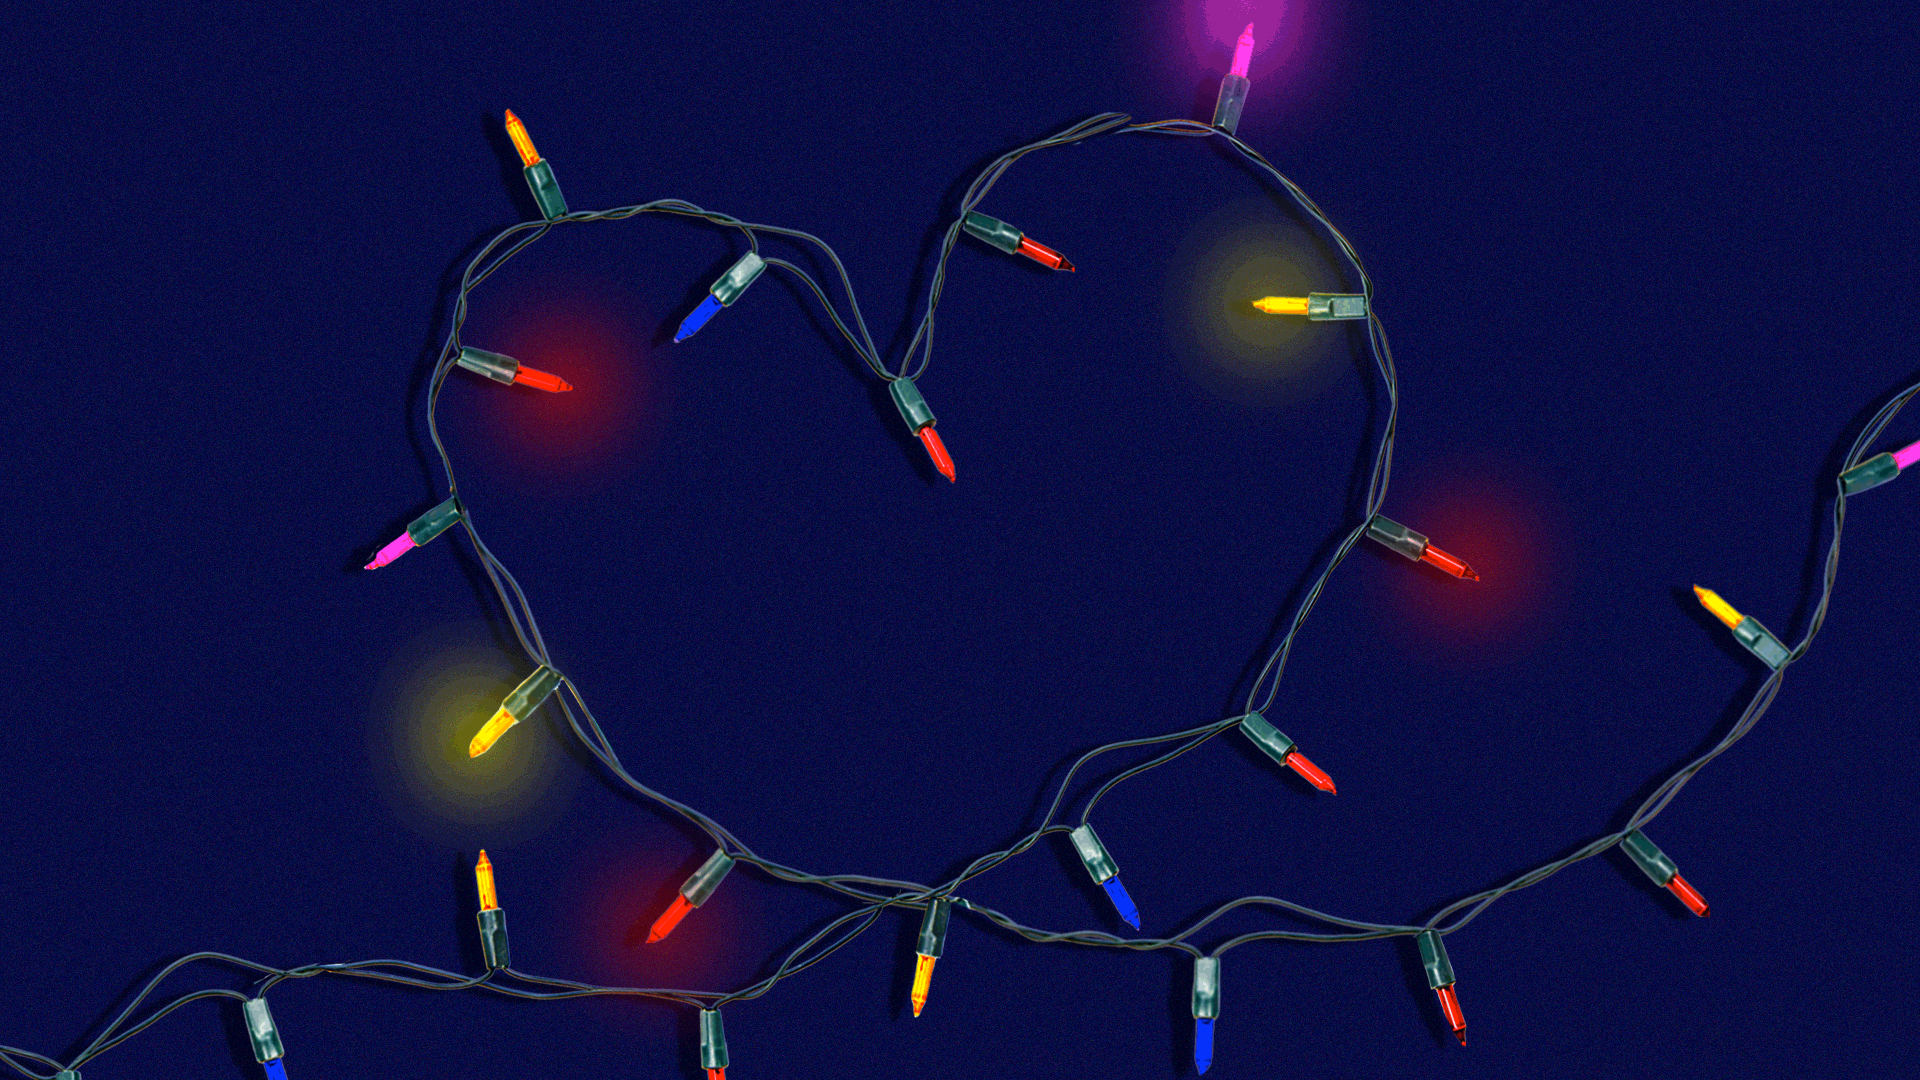 Illustration of holiday string lights in the shape of a heart.